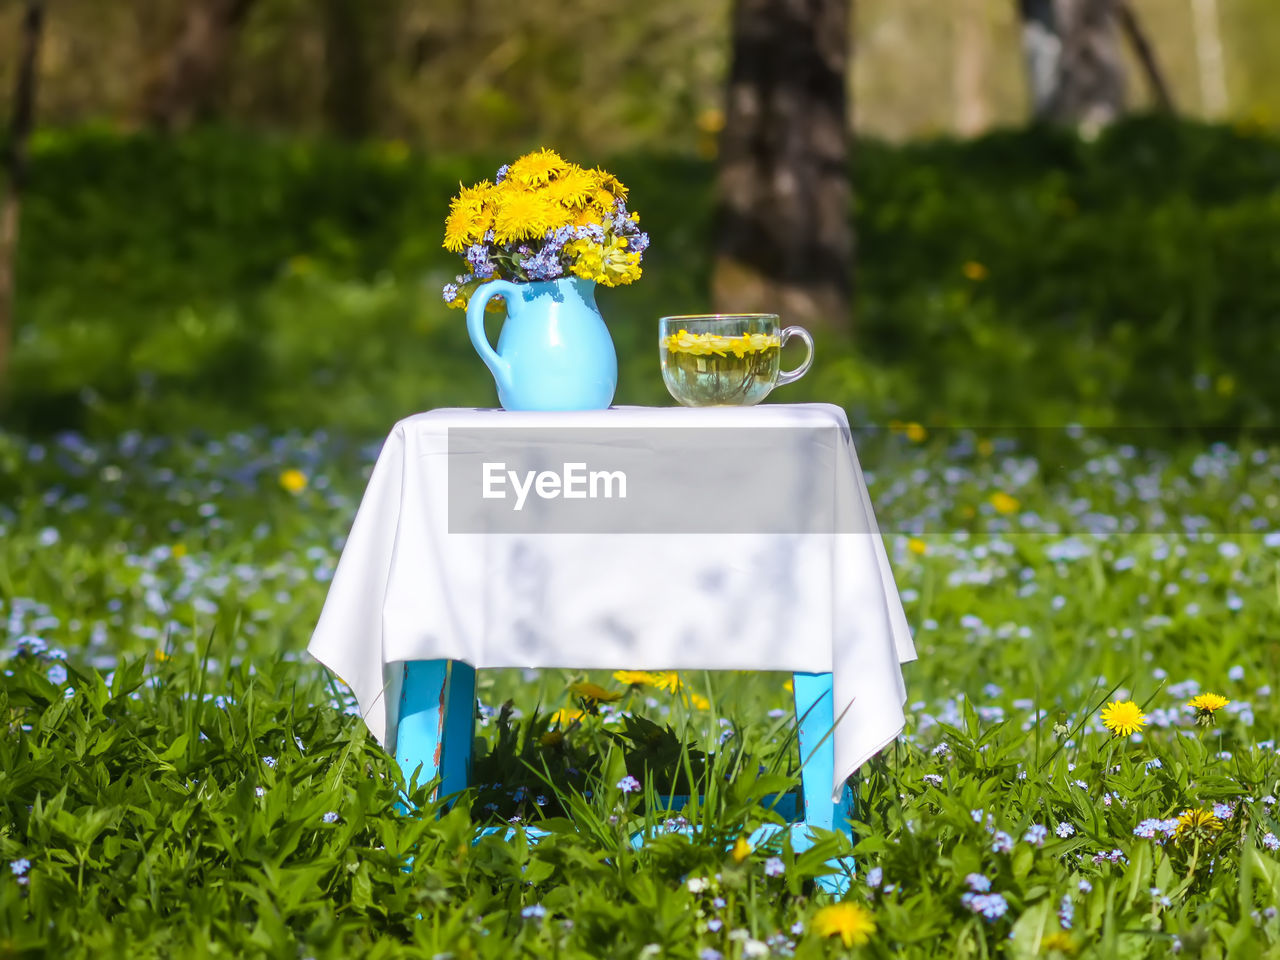 plant, yellow, flower, flowering plant, green, grass, nature, freshness, lawn, meadow, food and drink, no people, field, outdoors, day, summer, beauty in nature, plain, food, celebration, springtime, focus on foreground, sunlight, daffodil, land, selective focus, front or back yard